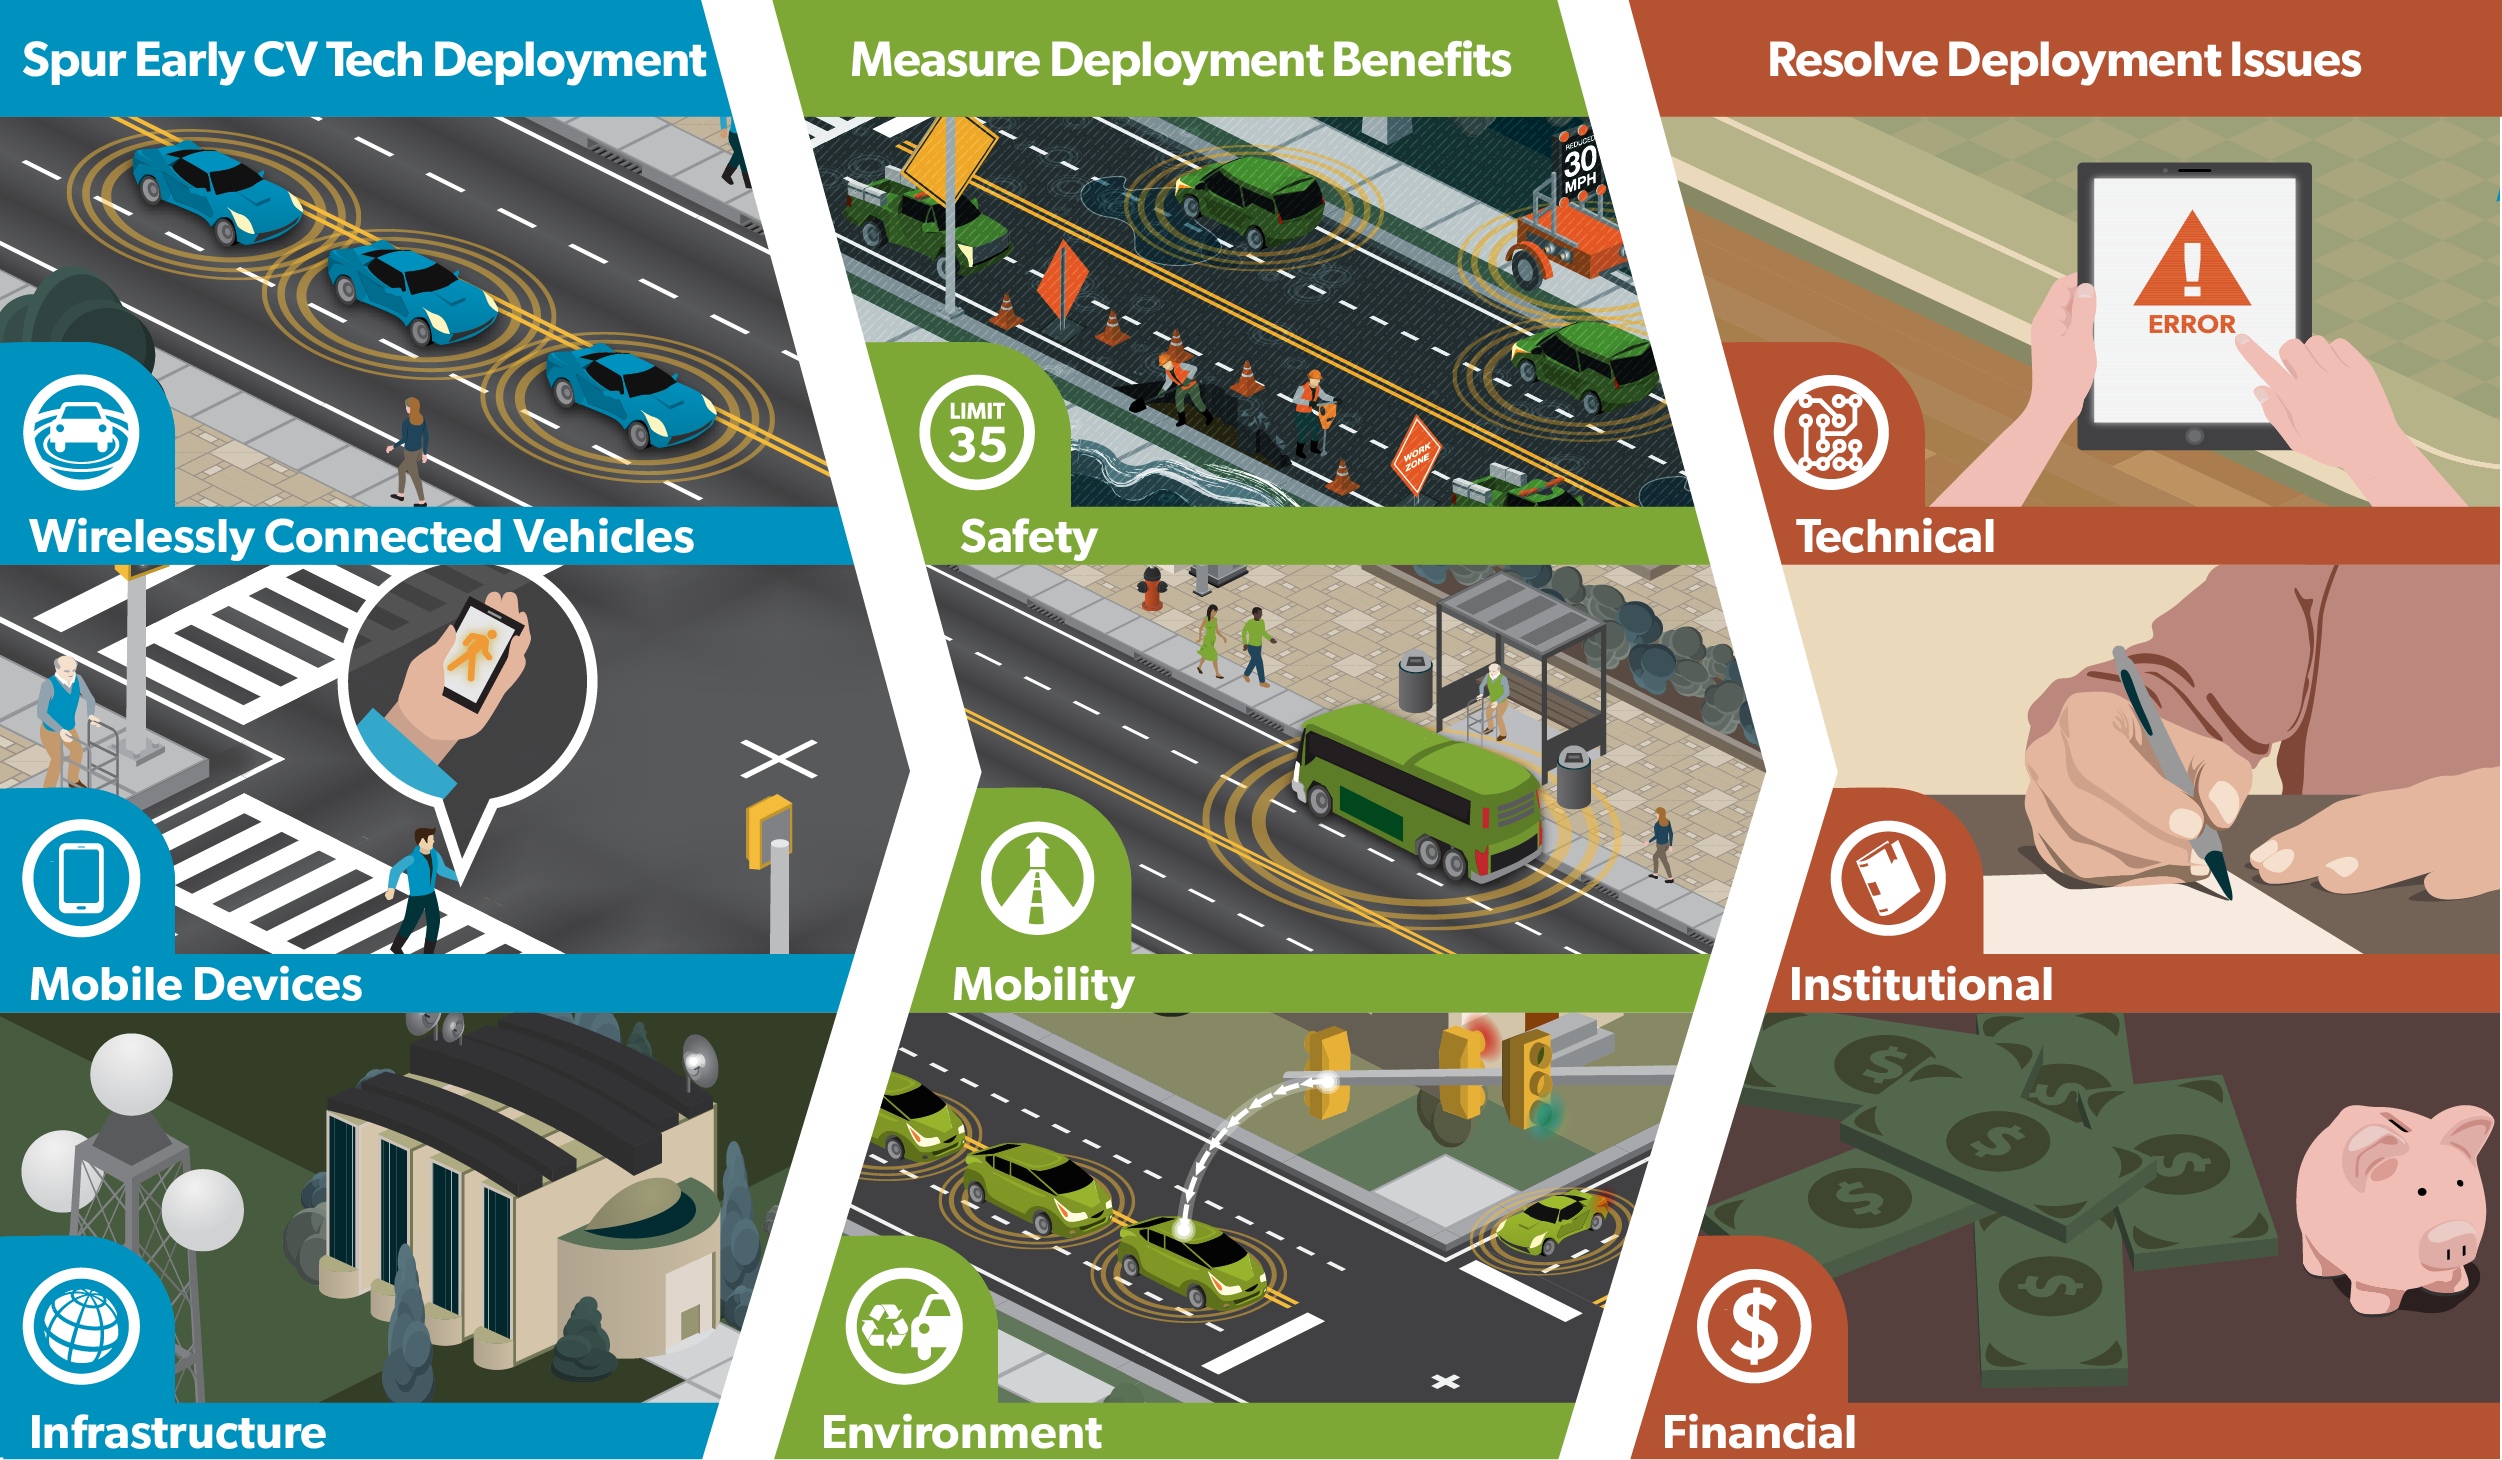 Three-part graphic representing the Connected Vehicle Pilot program goals. On the left is Spur Early CV Tech Deployment; images under show wirelessly connected vehicles, mobile devices, and infrastructure. In the middles is Measure Deployment Benefits; images below represent safety, mobility, and environment. On the right is Resolve Deployment Issues; images below represent technical, institutional, and financial.